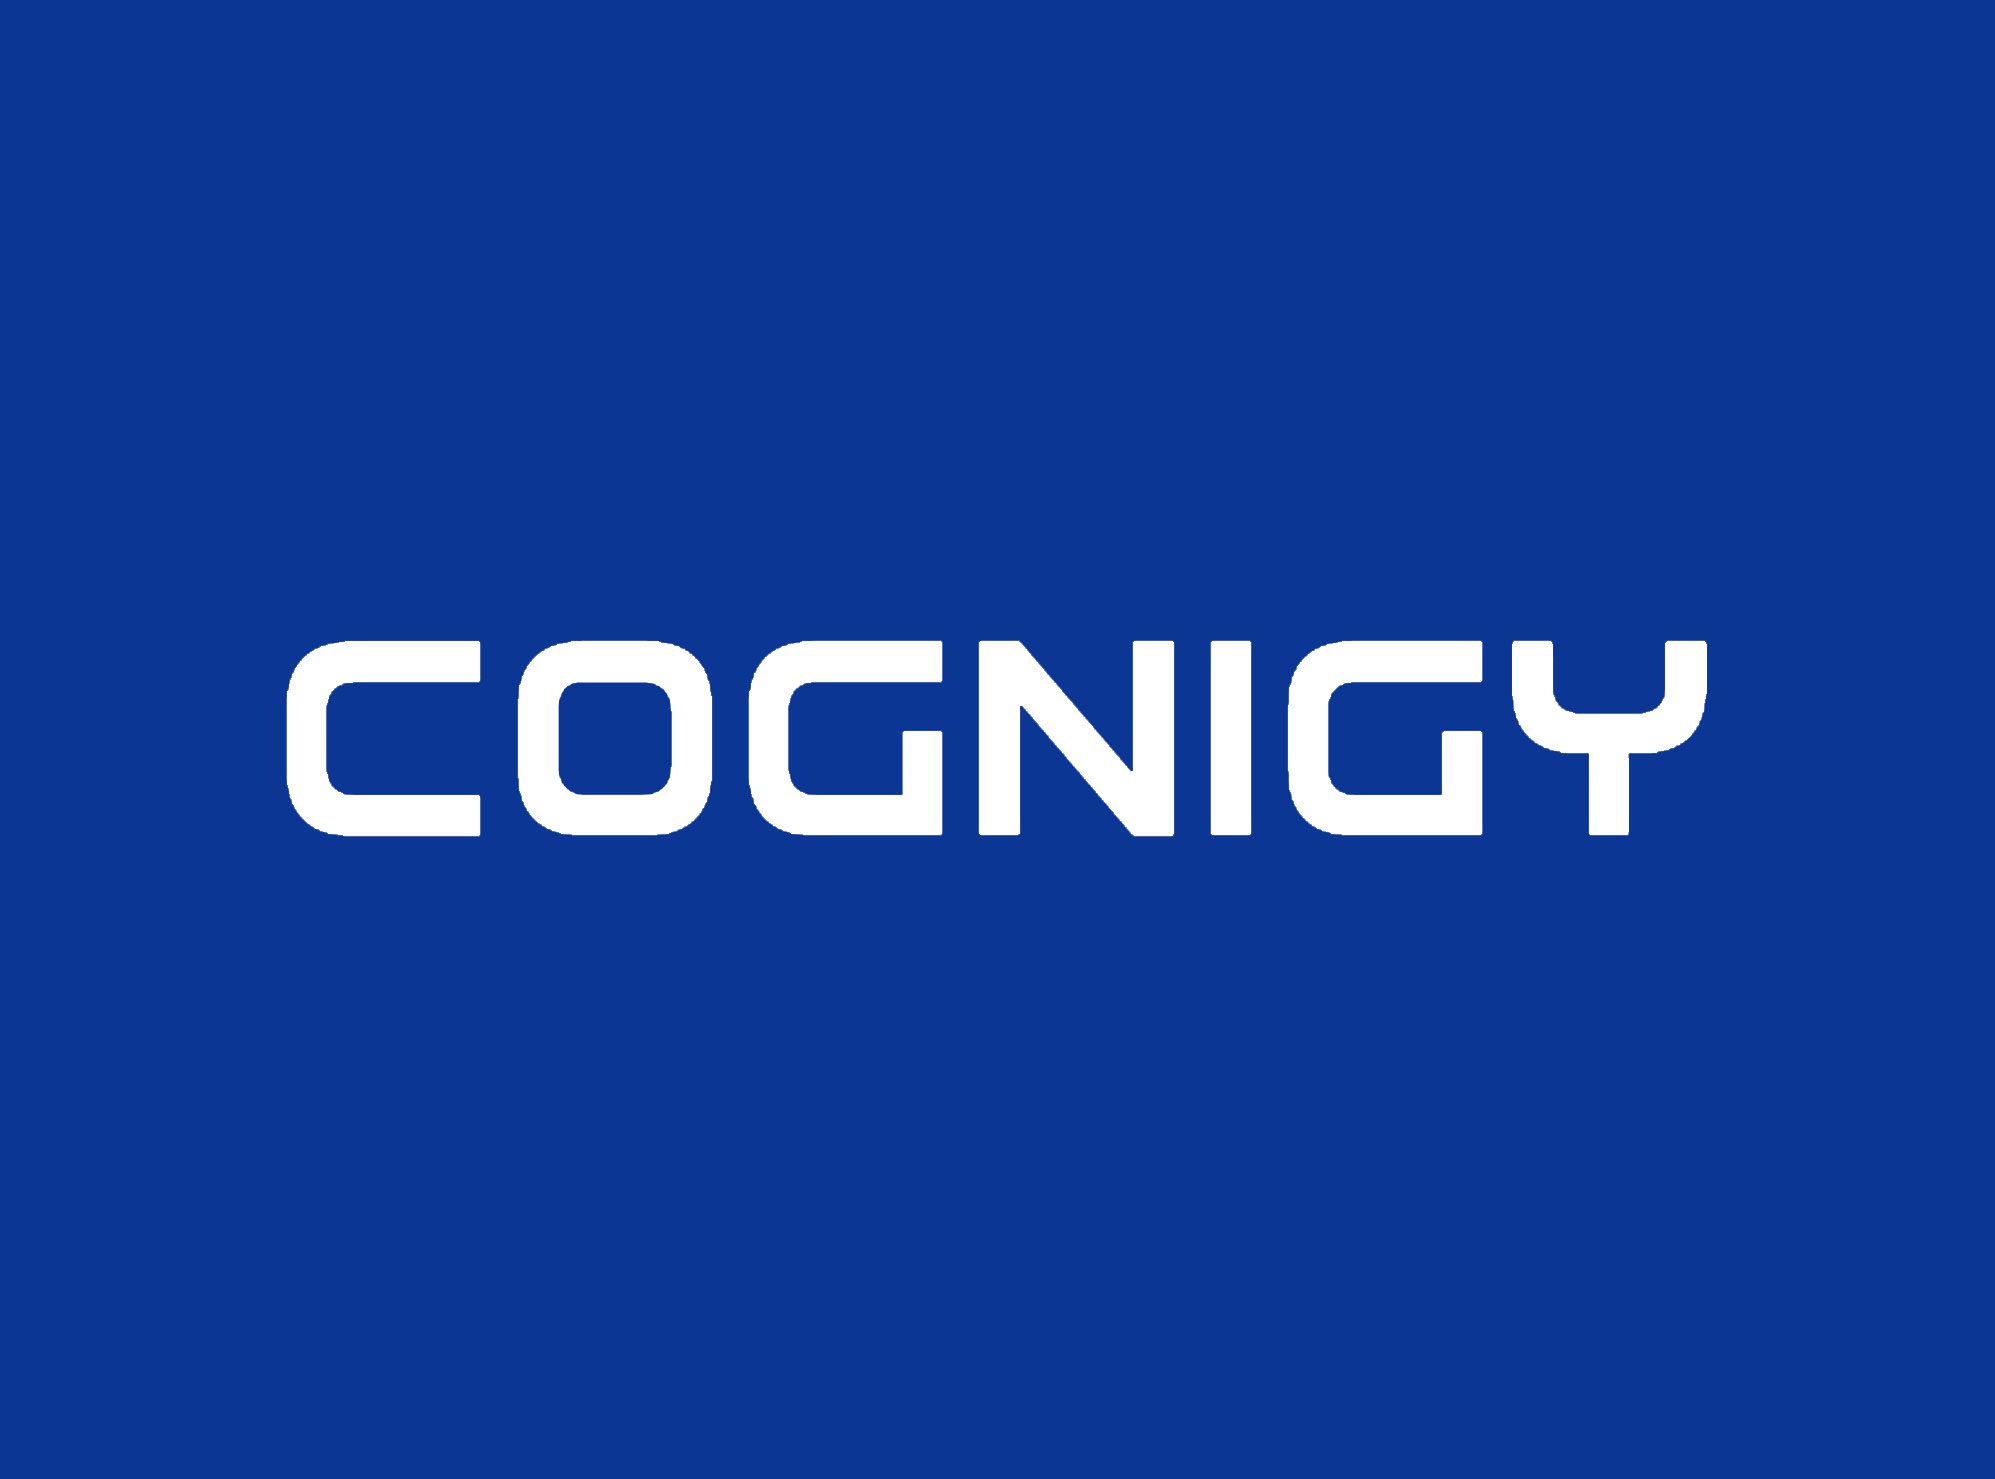 ROBOYO PARTNERS WITH LEADING CUSTOMER SERVICE AUTOMATION PROVIDER COGNIGY